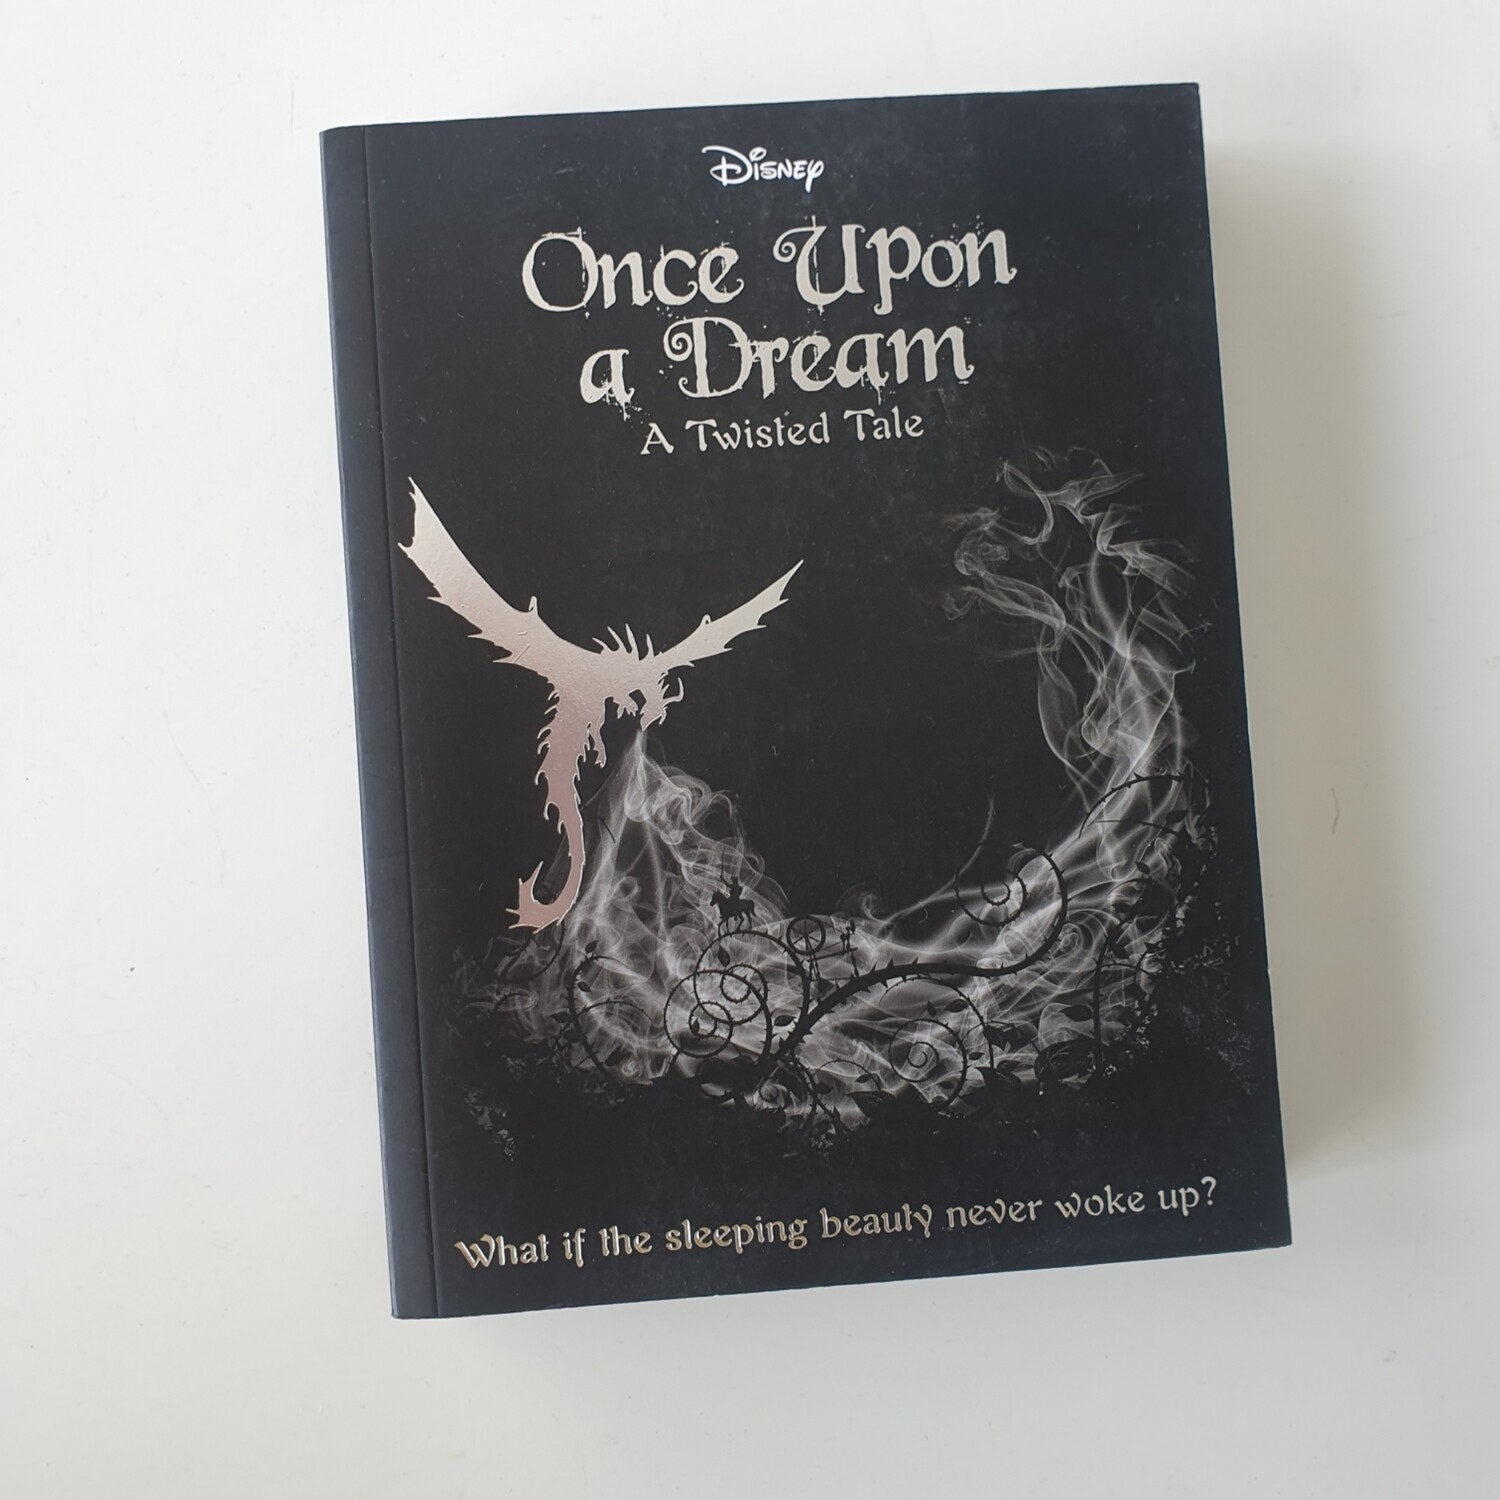 Once Upon a Dream - Sleeping Beauty - A Twisted Tale, Disney Notebook - made from a paperback book, comes with book corners